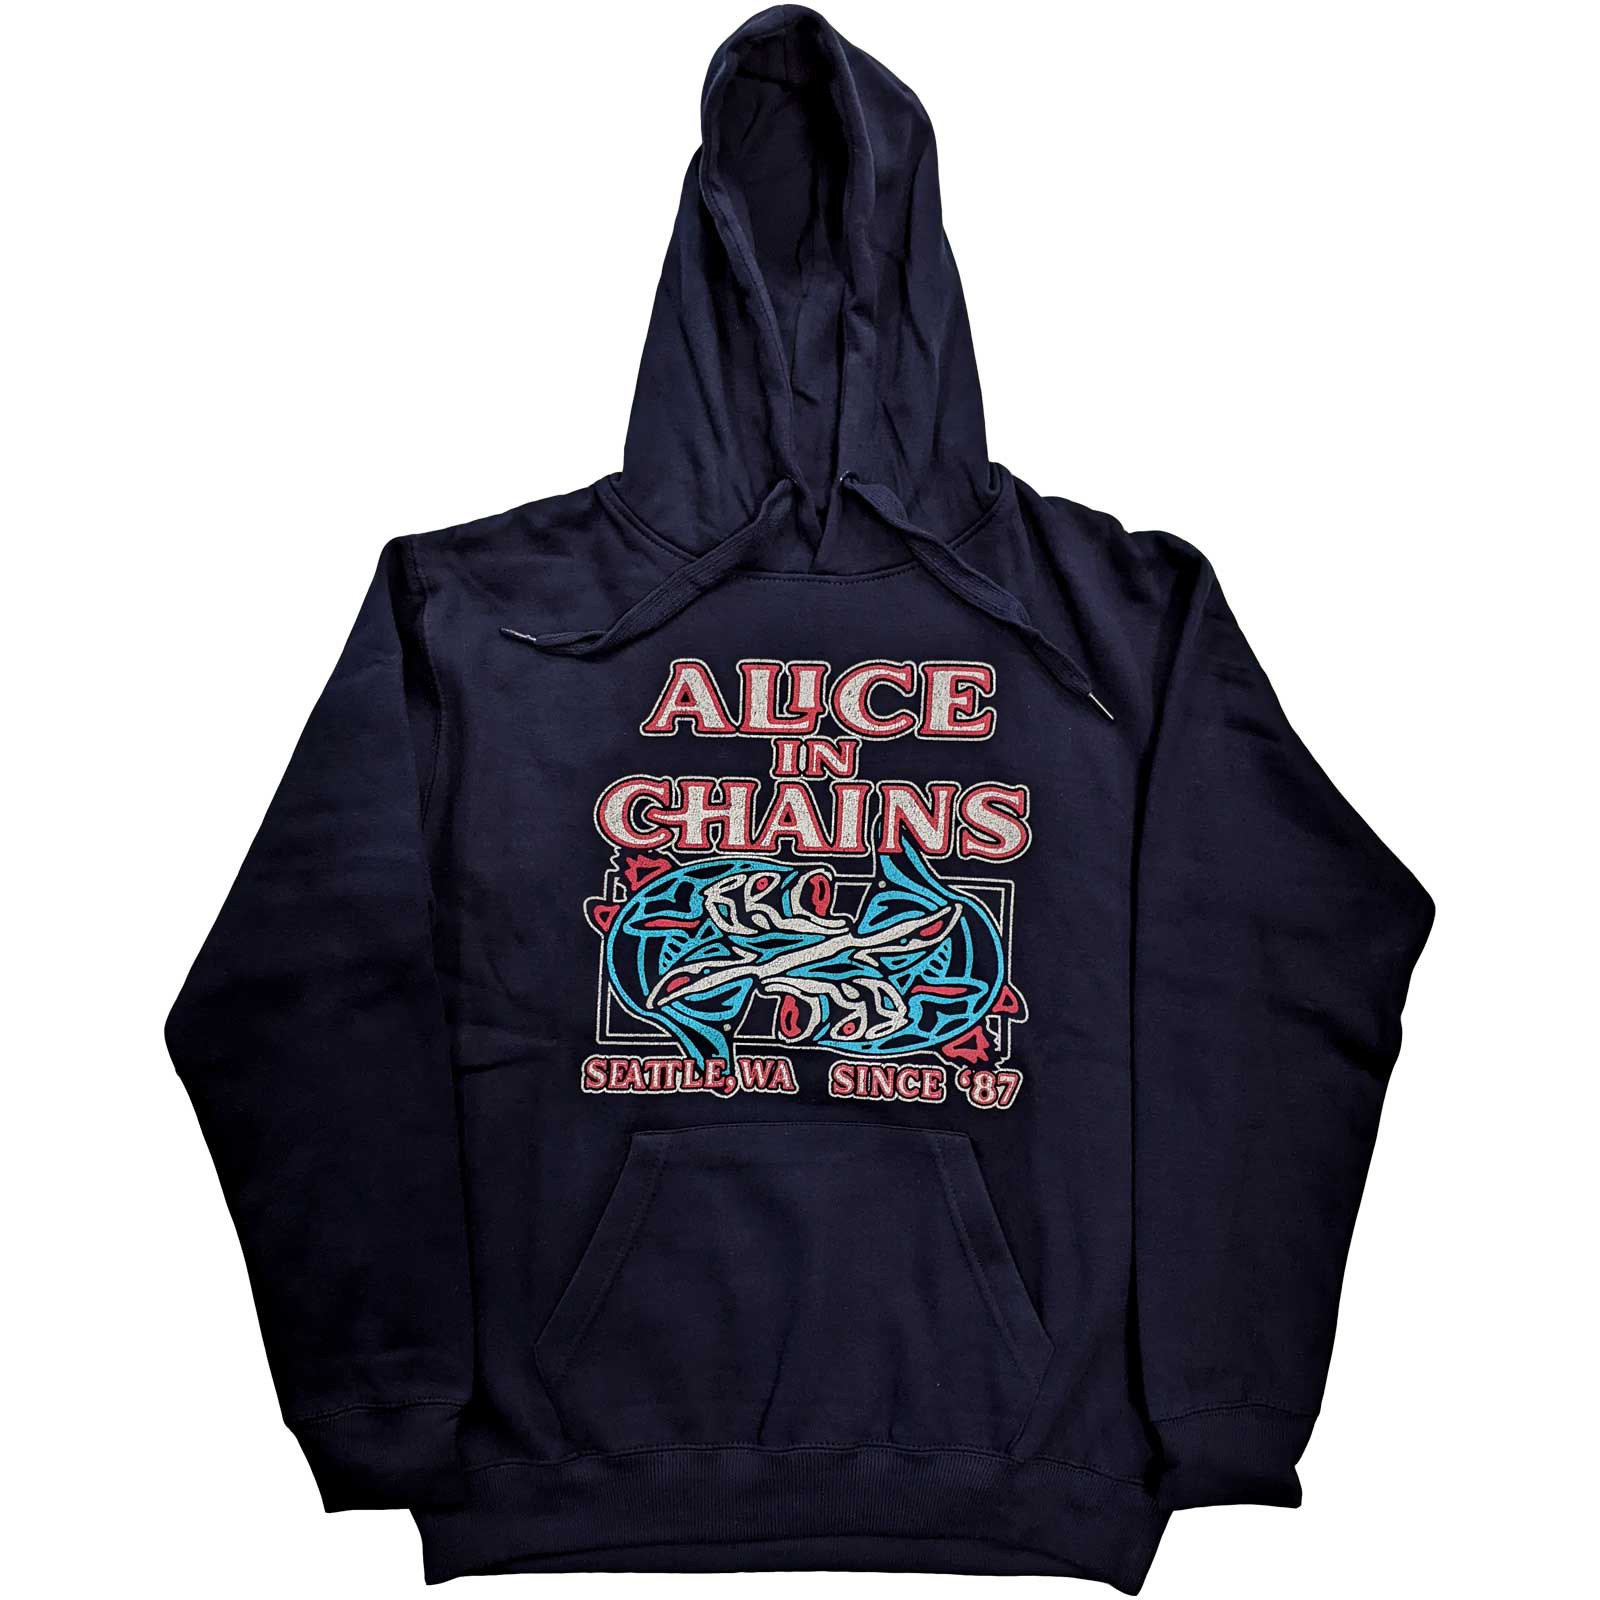 ALICE IN CHAINS Totem Fish